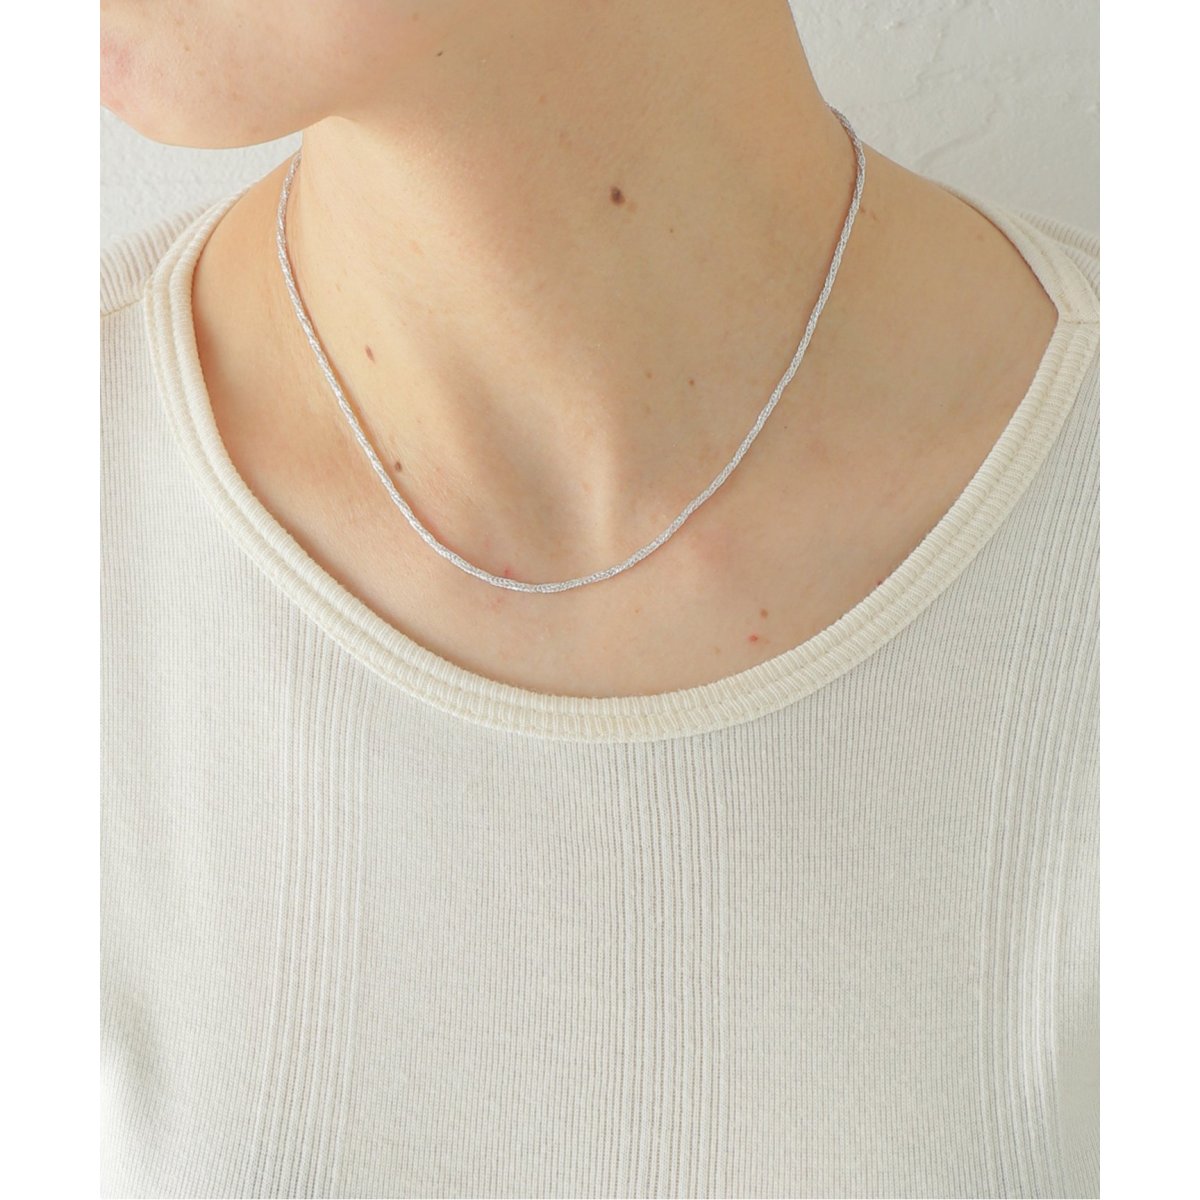 Soierie / ソワリー】STACKING SILVER NECKLACE (3PSET)：ネックレス 